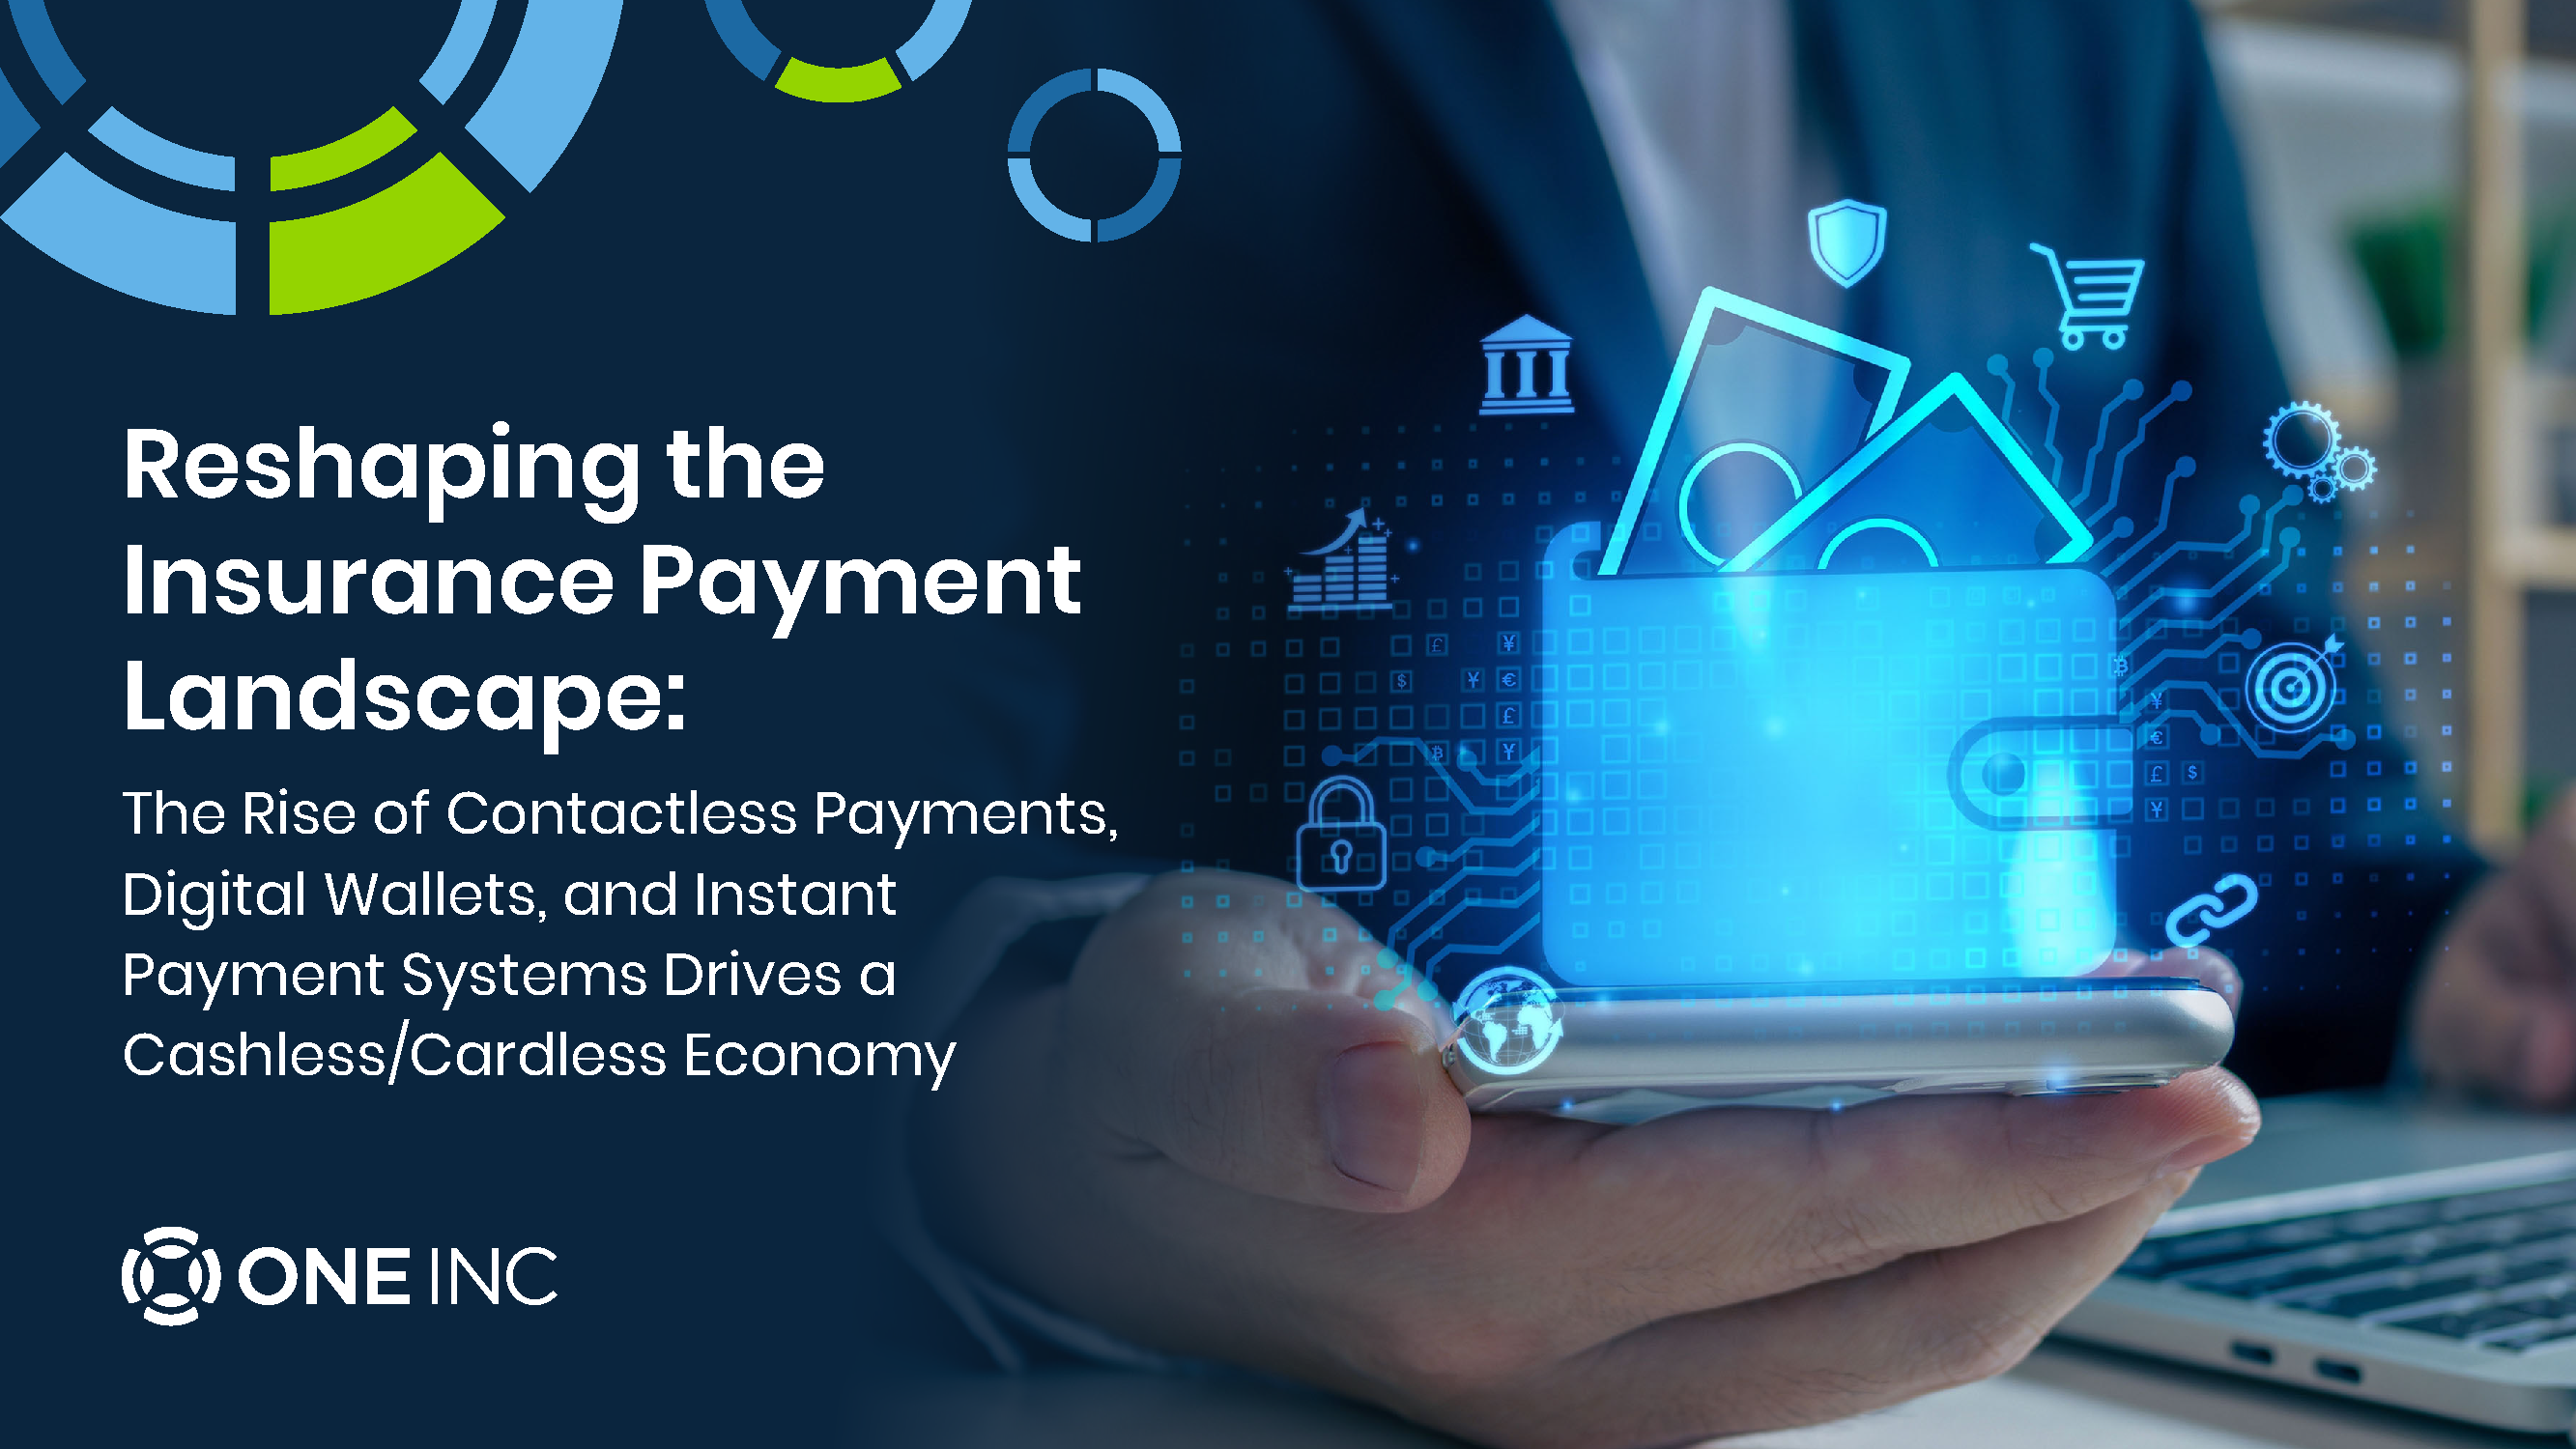 Reshaping the Insurance Payment Landscape: The Rise of Contactless Payments, Digital Wallets and Instant Payment Systems Illustration